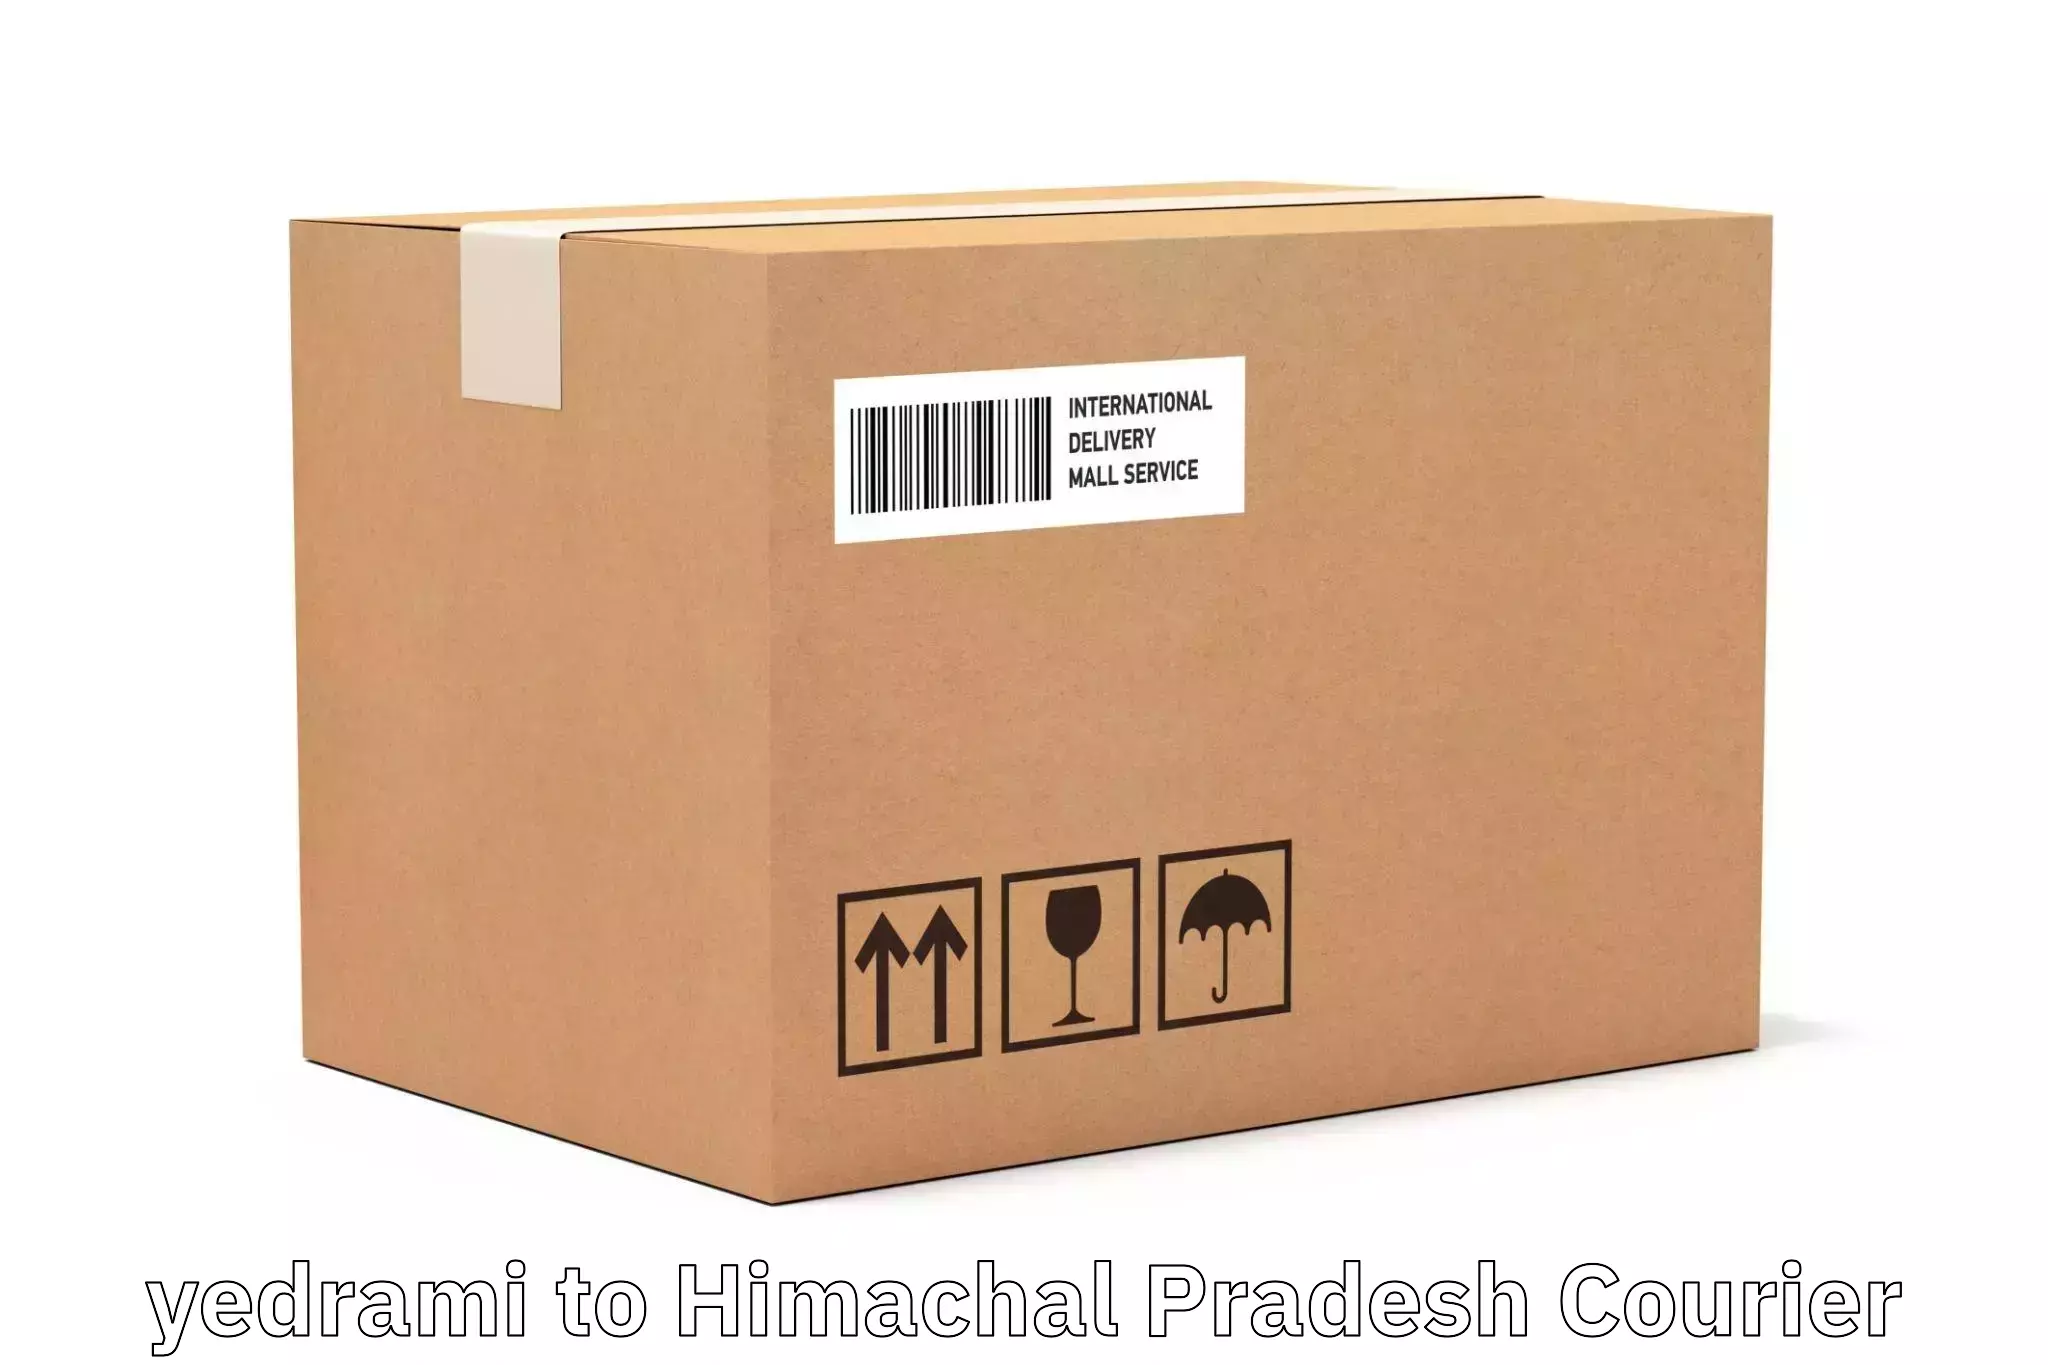 Multi-national courier services in yedrami to Himachal Pradesh